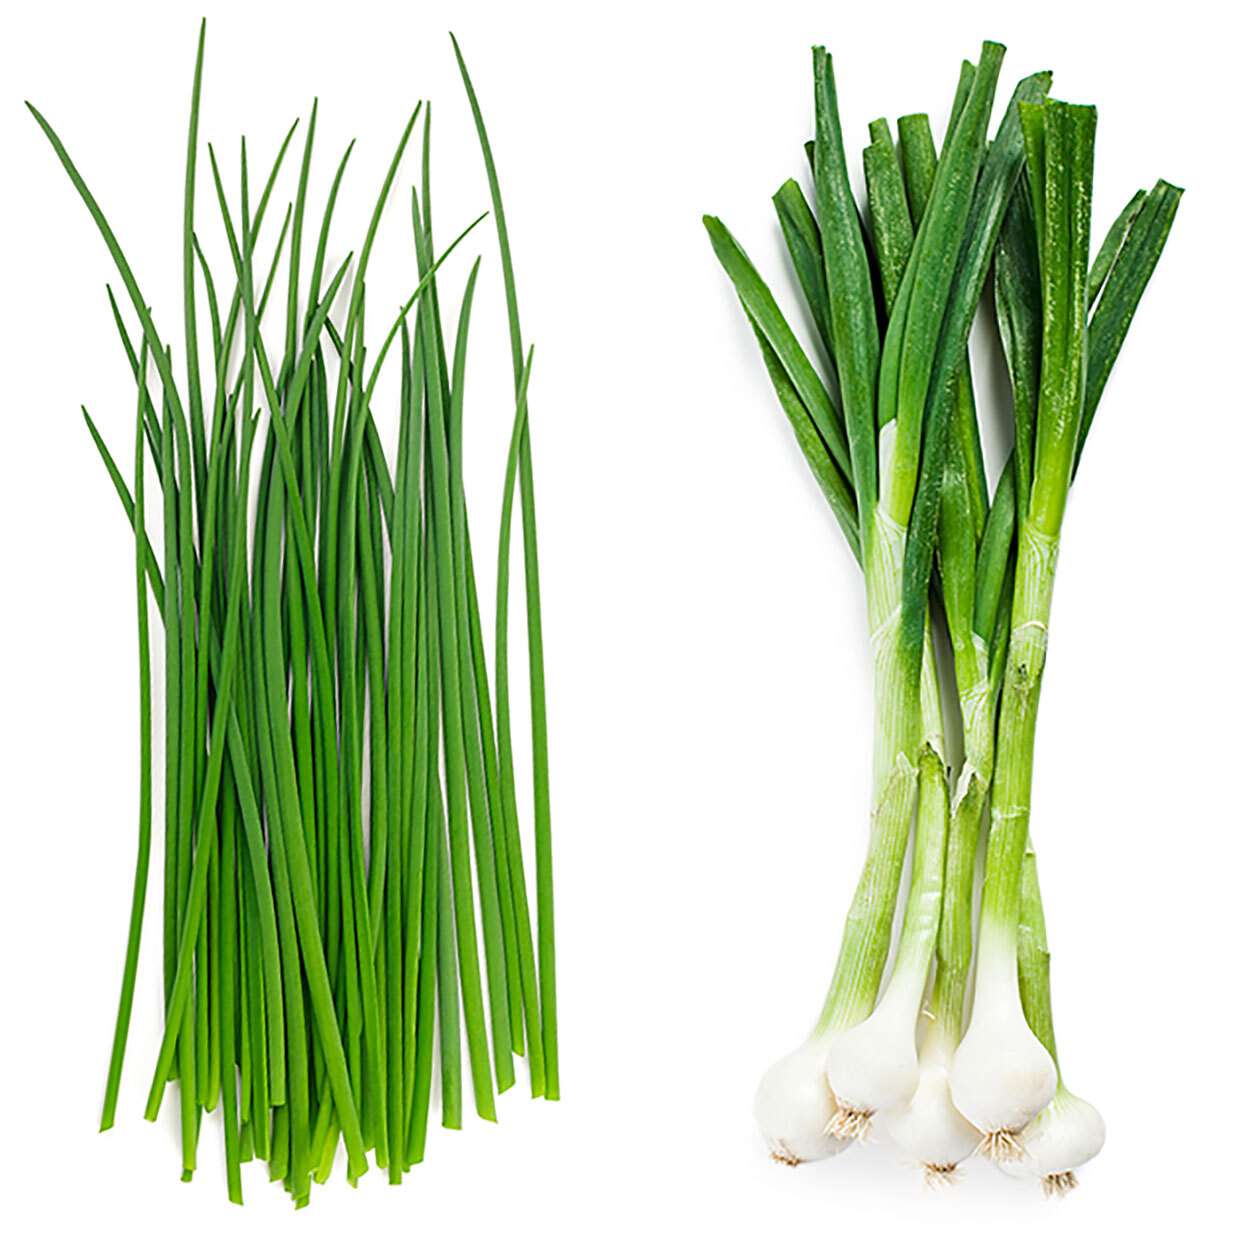 Chives vs. Green Onions